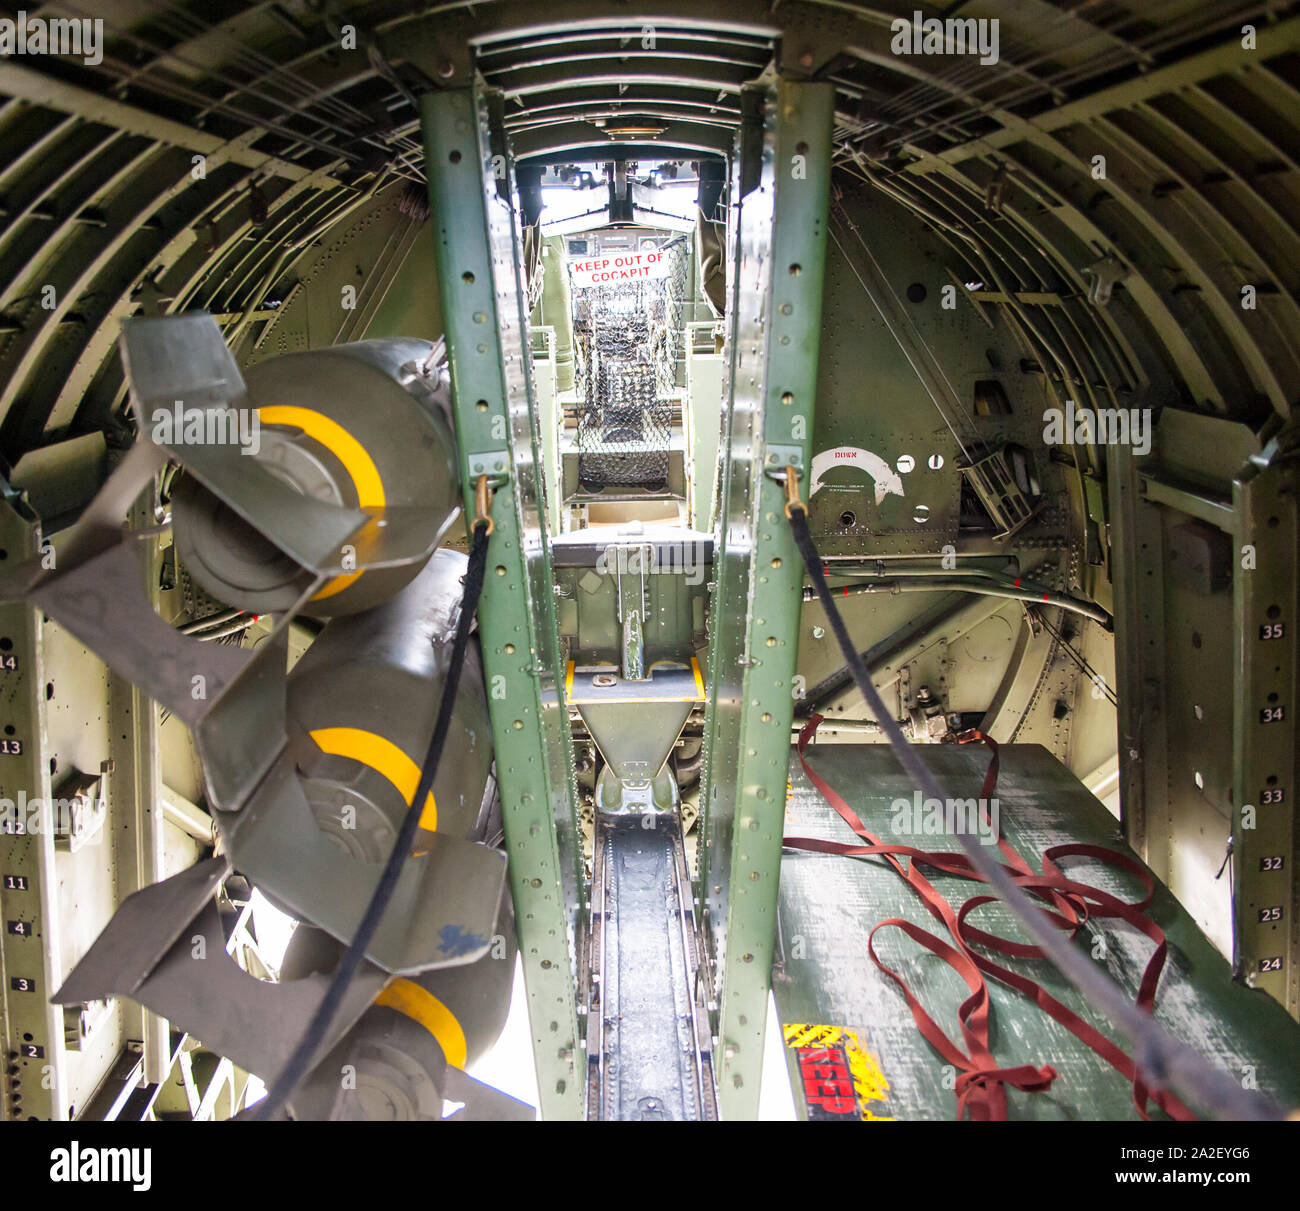 Interior Of Collings Foundation S B 17g Flying Fortress